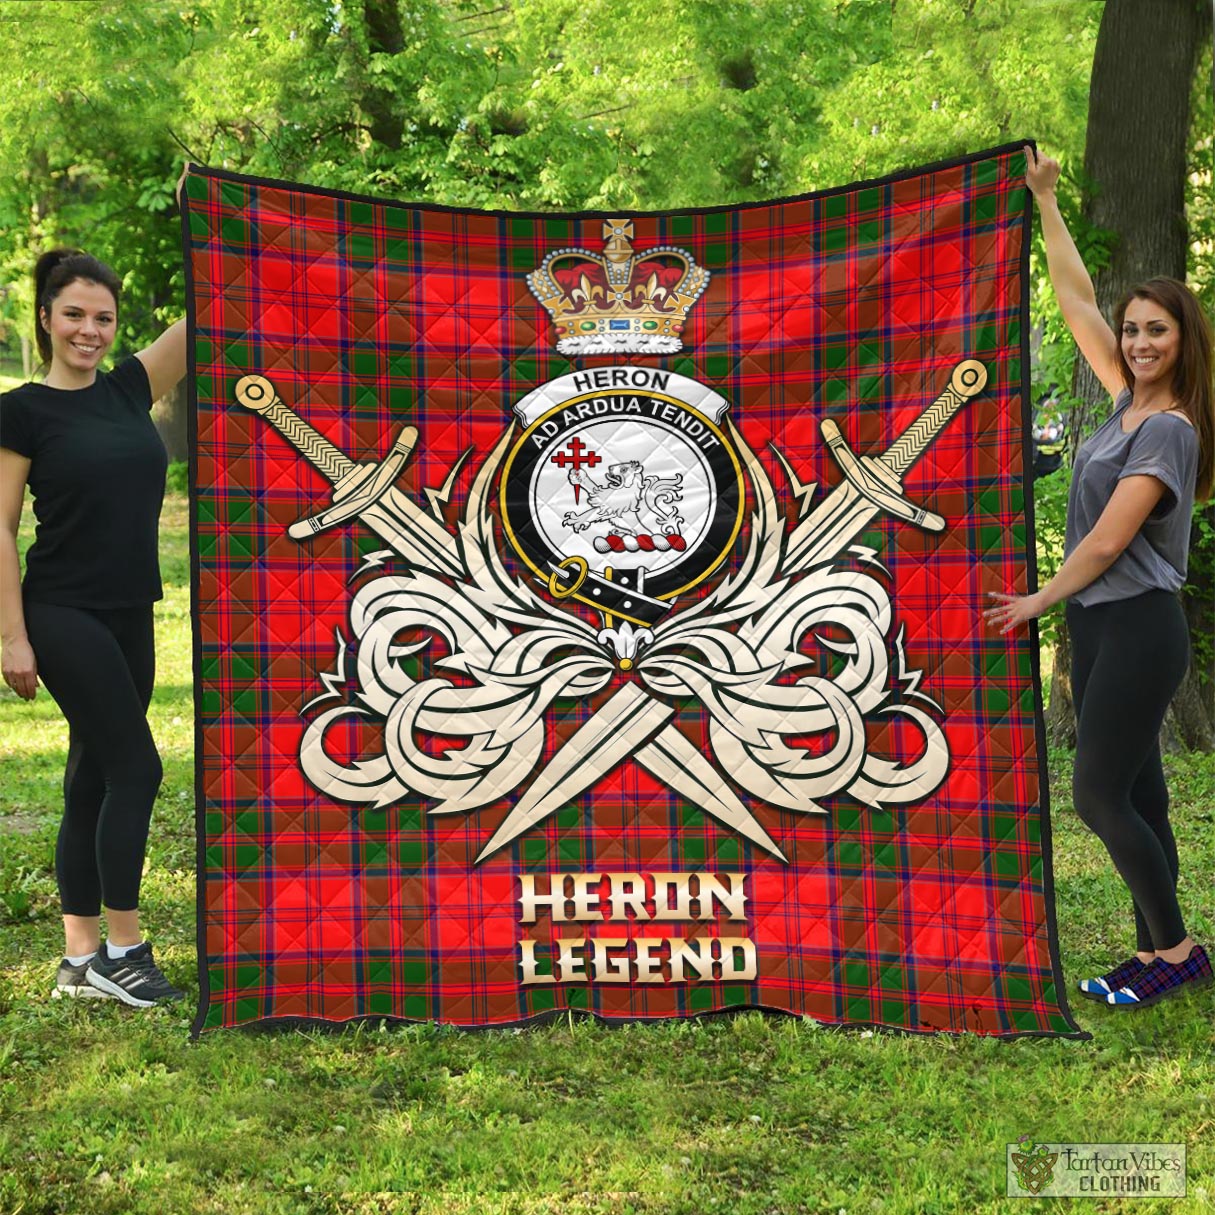 Tartan Vibes Clothing Heron Tartan Quilt with Clan Crest and the Golden Sword of Courageous Legacy